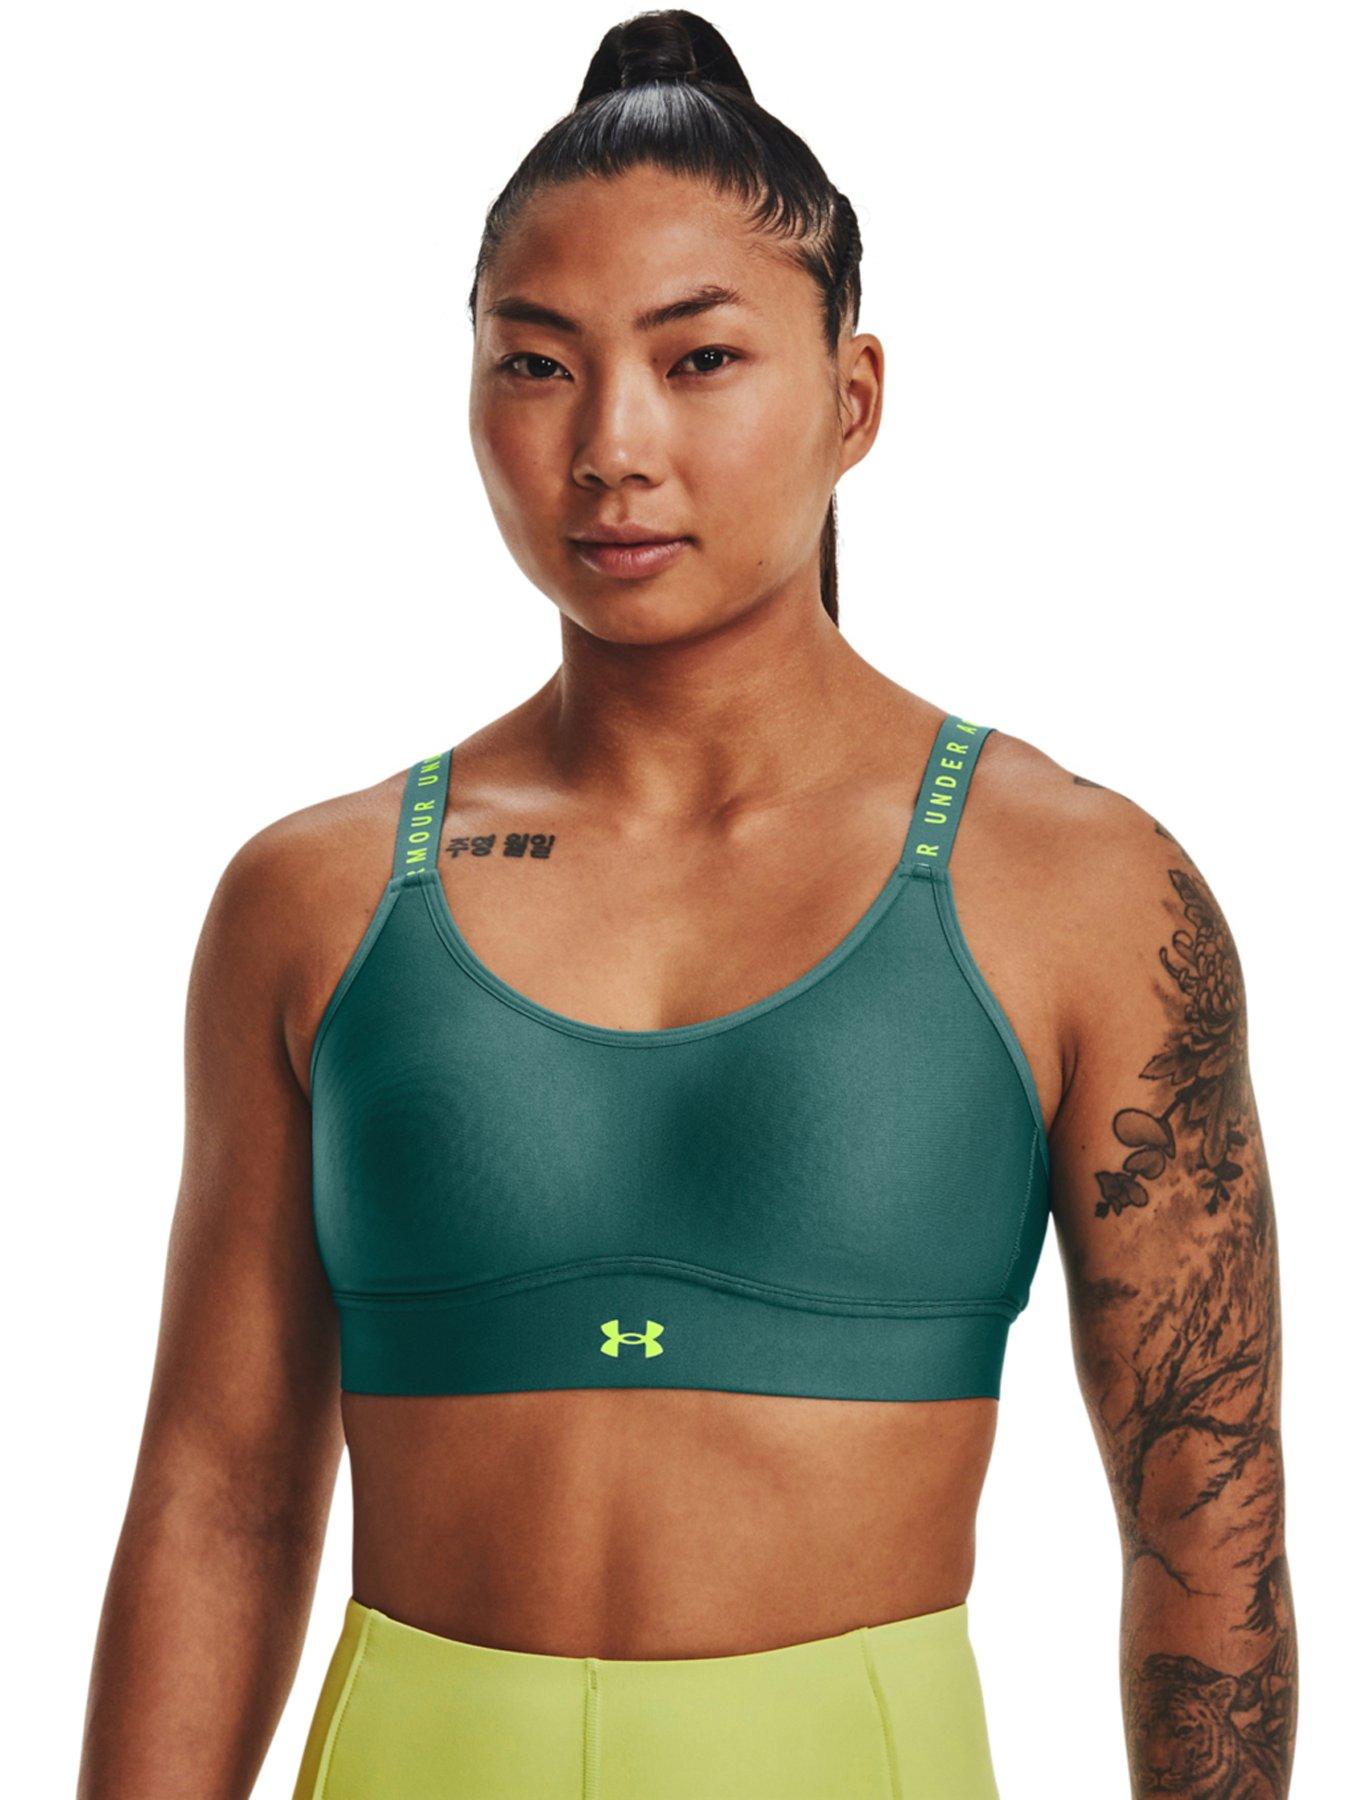 Under Armour Crossback mid support sports bra in green